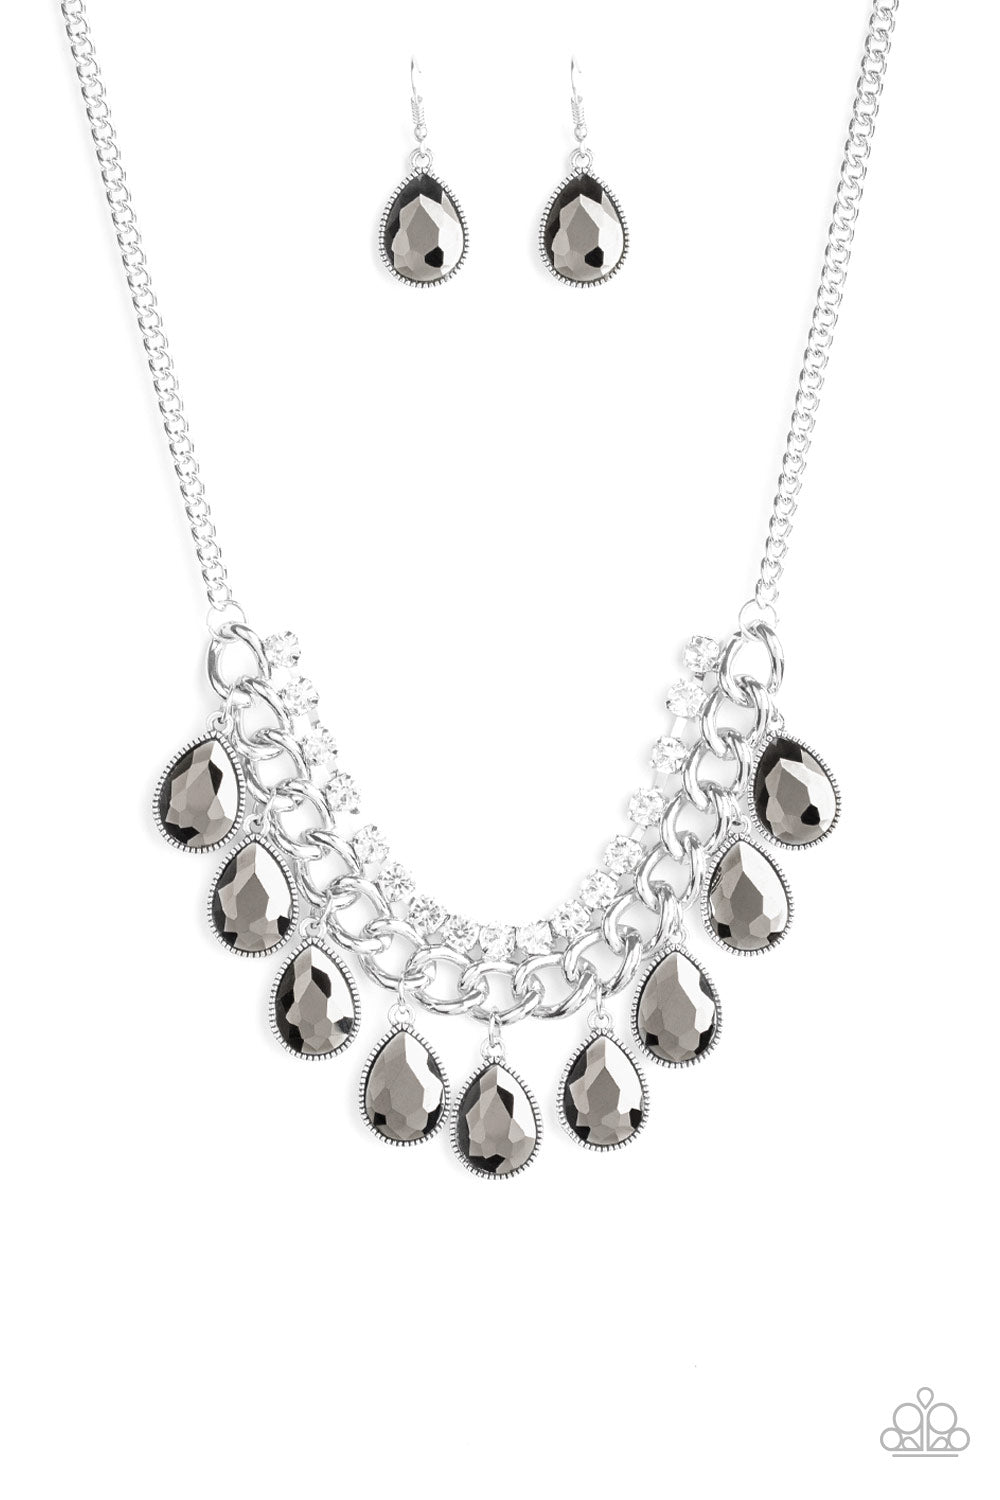 All Toget-HEIR Now Silver Necklace - Paparazzi Accessories - jazzy-jewels-gems